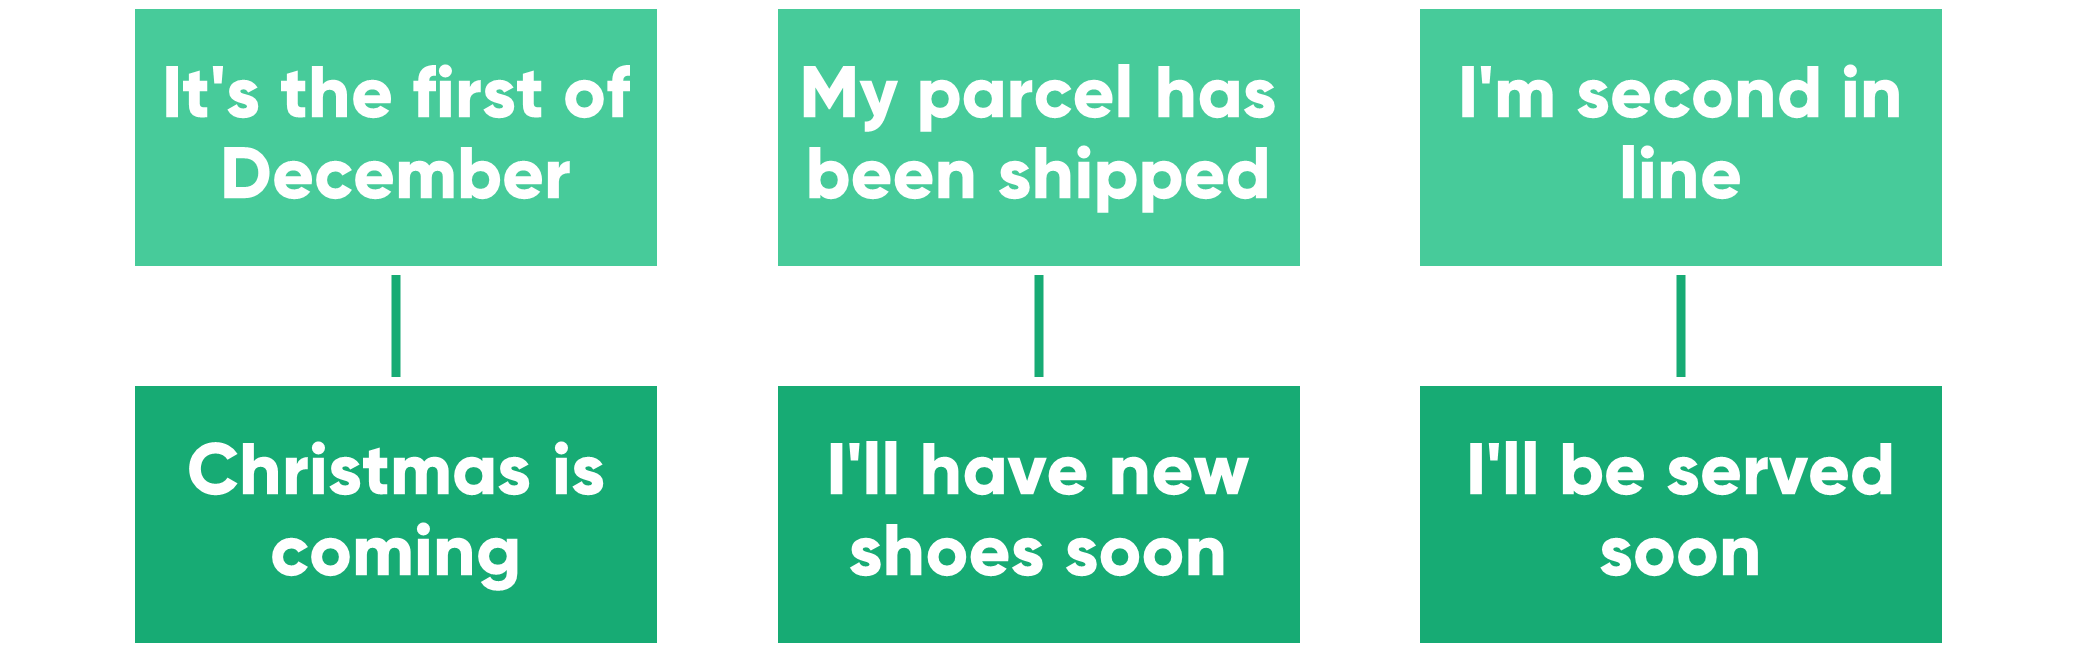 3 anticipation examples. Cue "my parcel has been shipped", response "I'll have new shoes soon"